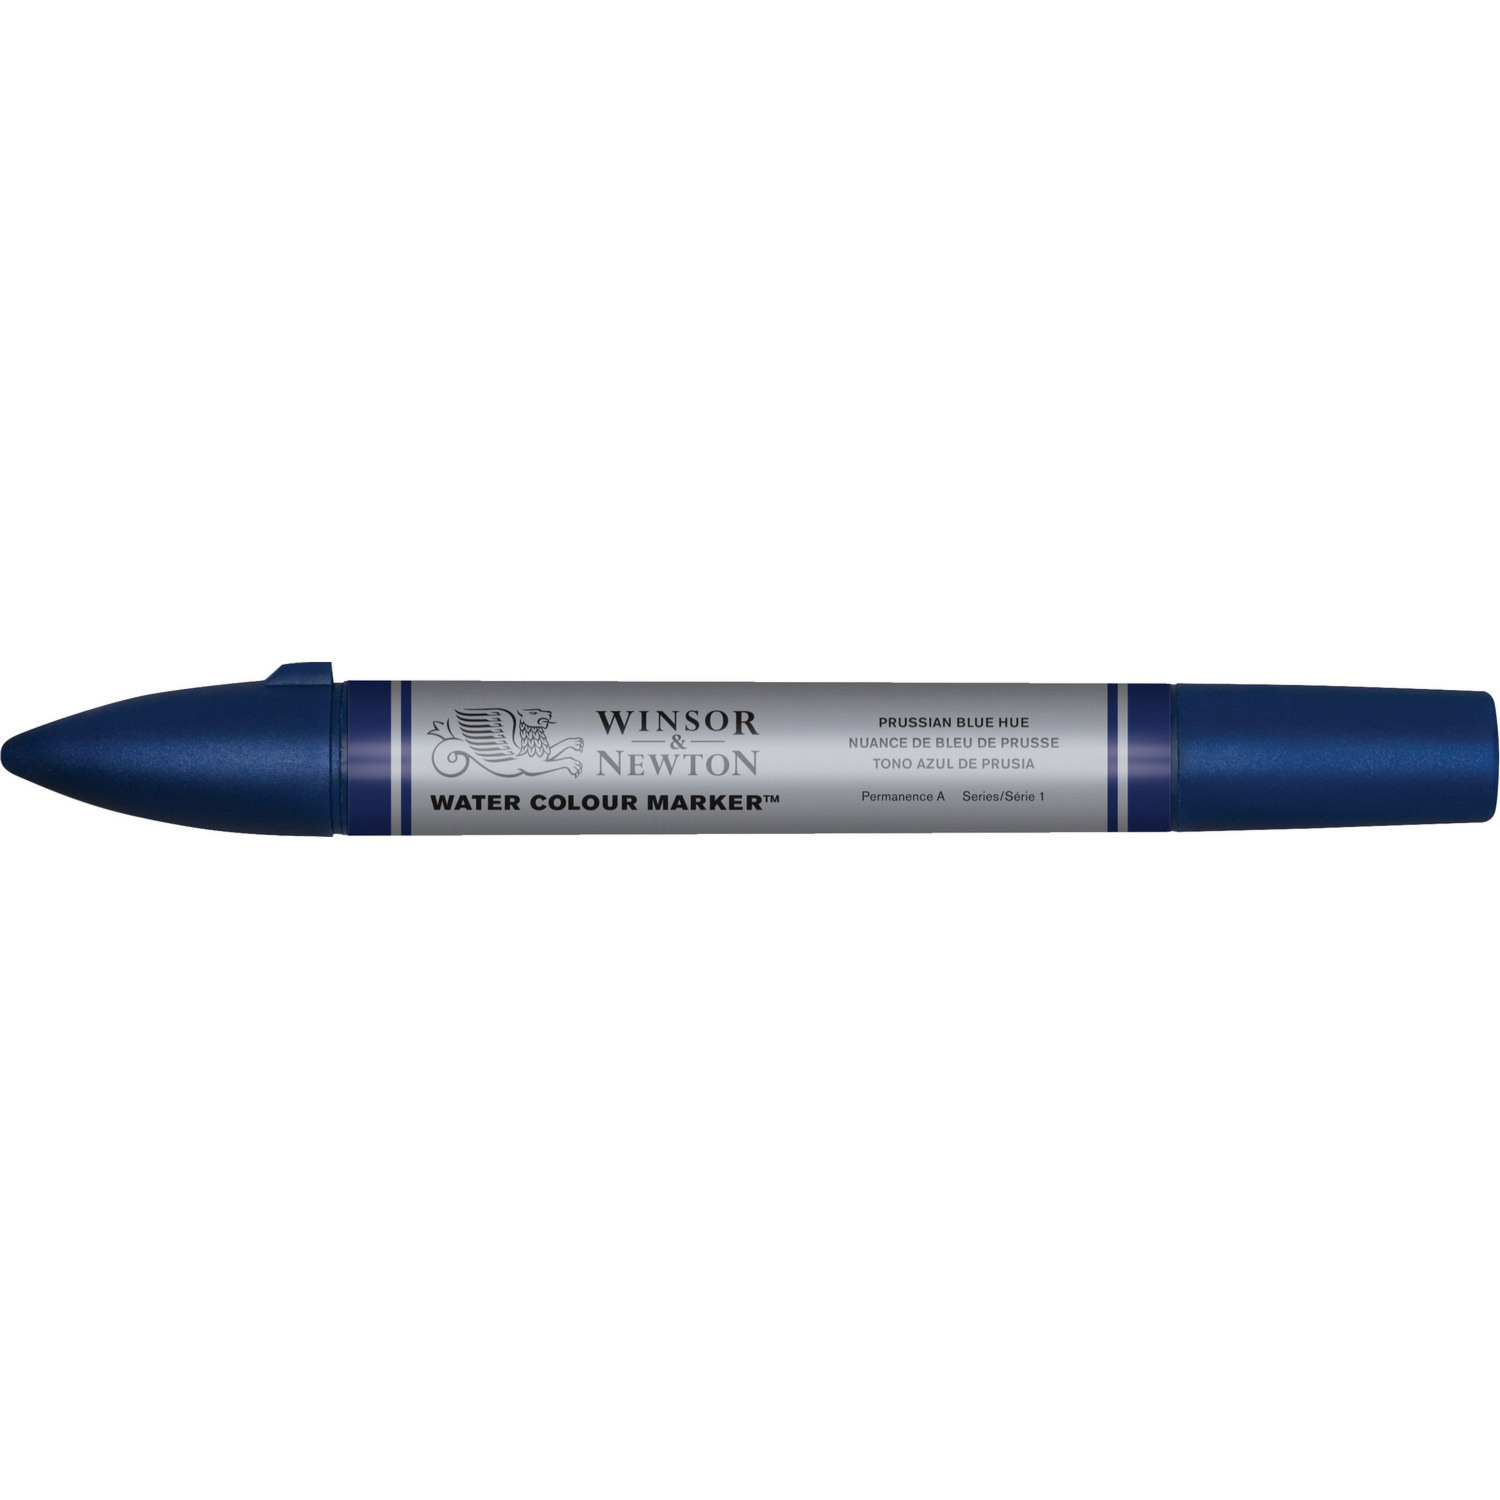 Winsor and Newton Water Colour Marker - Prussian Blue Image 1